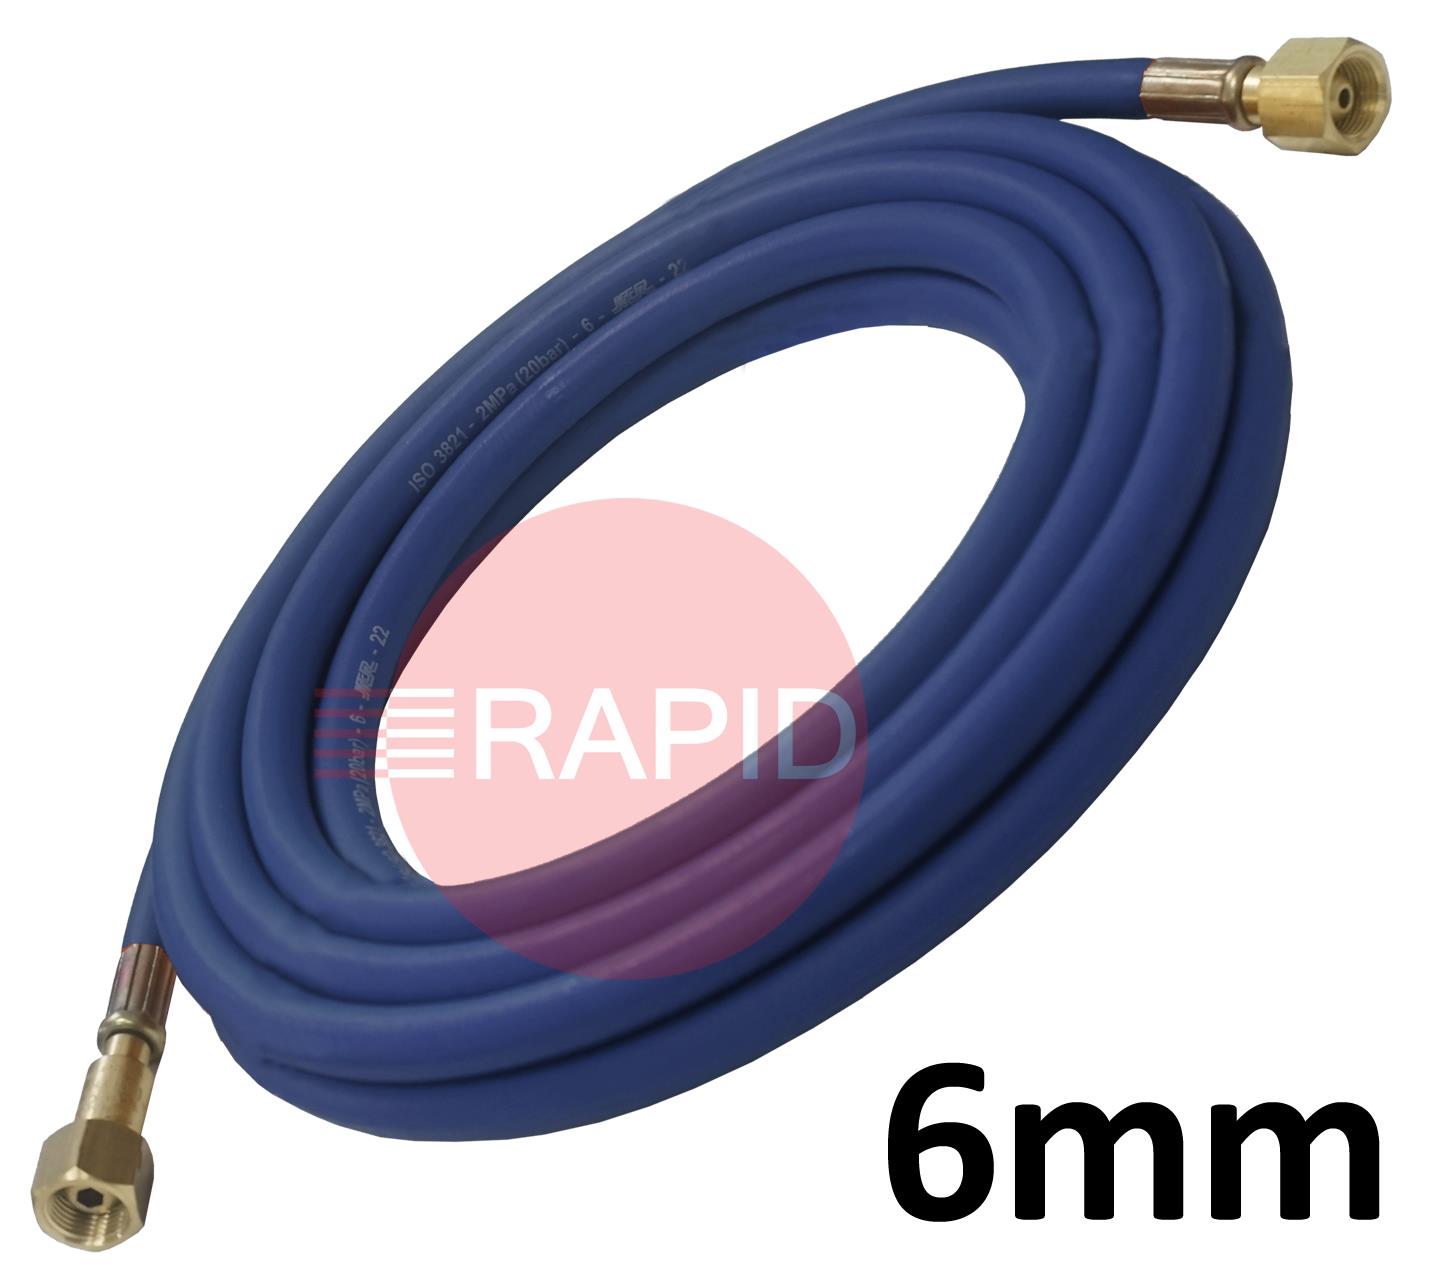 A5111  Fitted Oxygen Hose. 6mm Bore. G3/8 Check Valve & G3/8 Regulator Connection - 5m